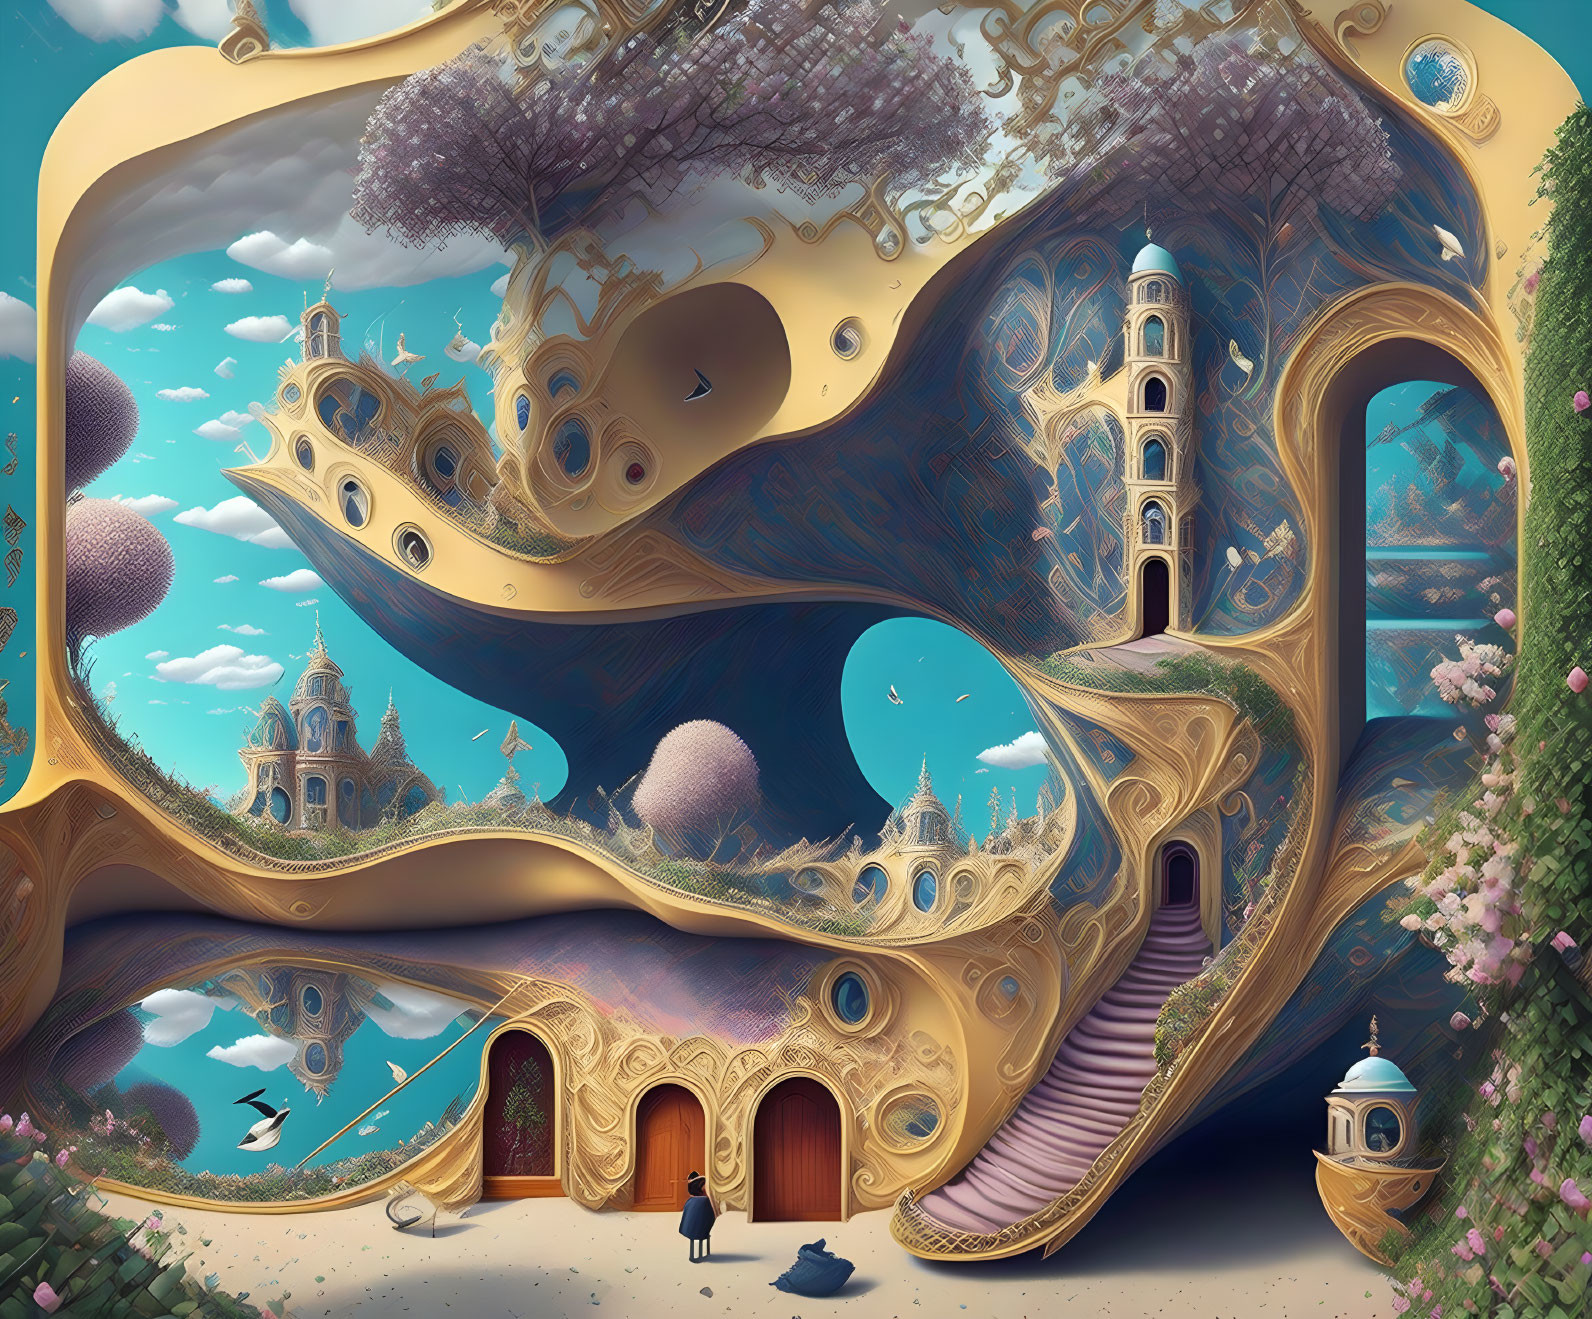 Vibrant surreal landscape with floating islands and whimsical structures